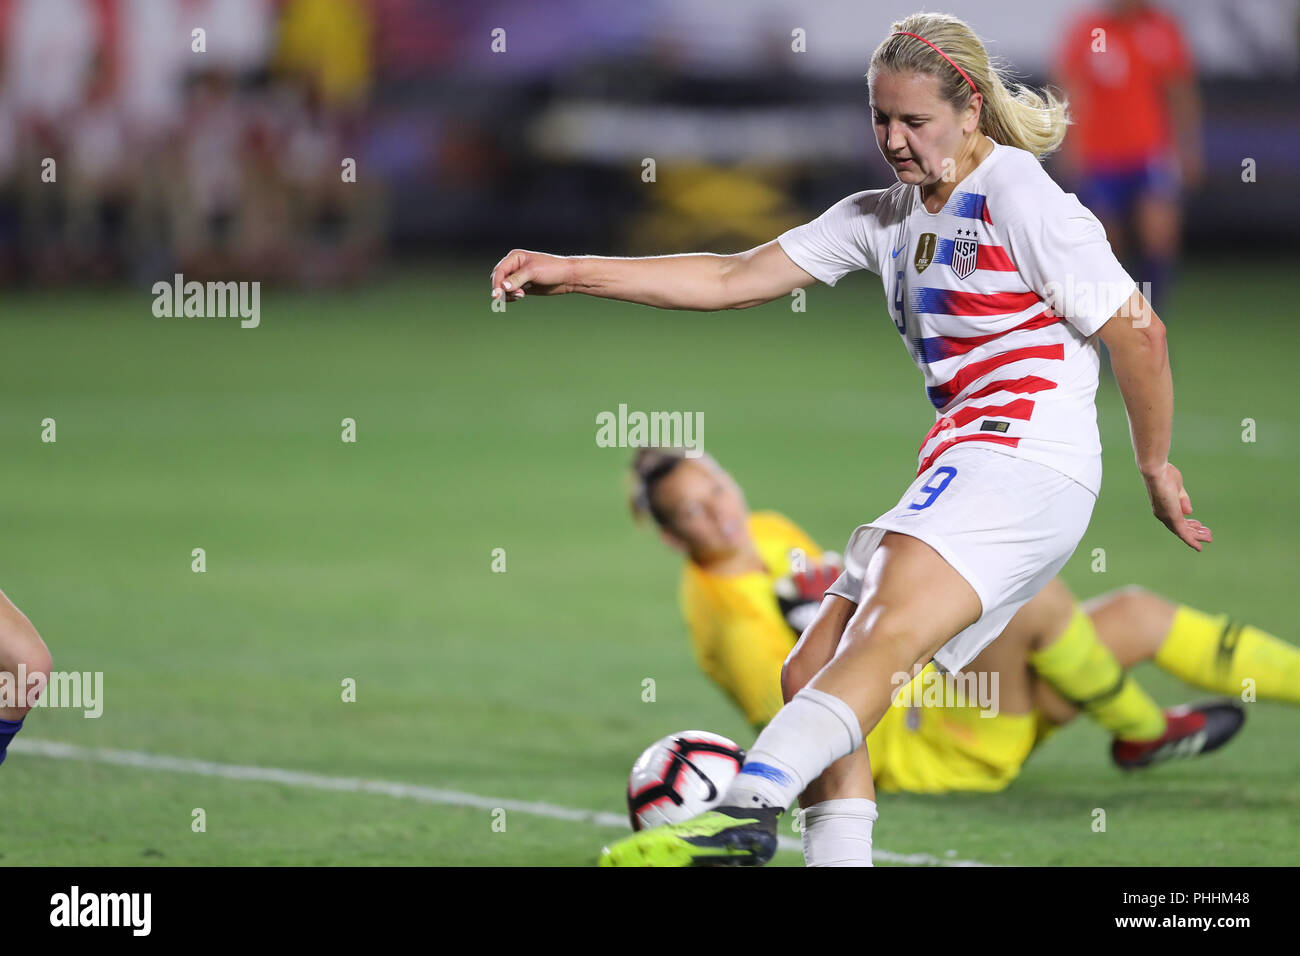 August 31, 2018: With the goalkeeper down USA Lindsey Pugh (9) takes a shot on goal but the effort is disallowed by a foul during the game between Chile and USA on August 31, 2018, at the StubHub Center in Carson, CA. USA. (Photo by Peter Joneleit) Stock Photo